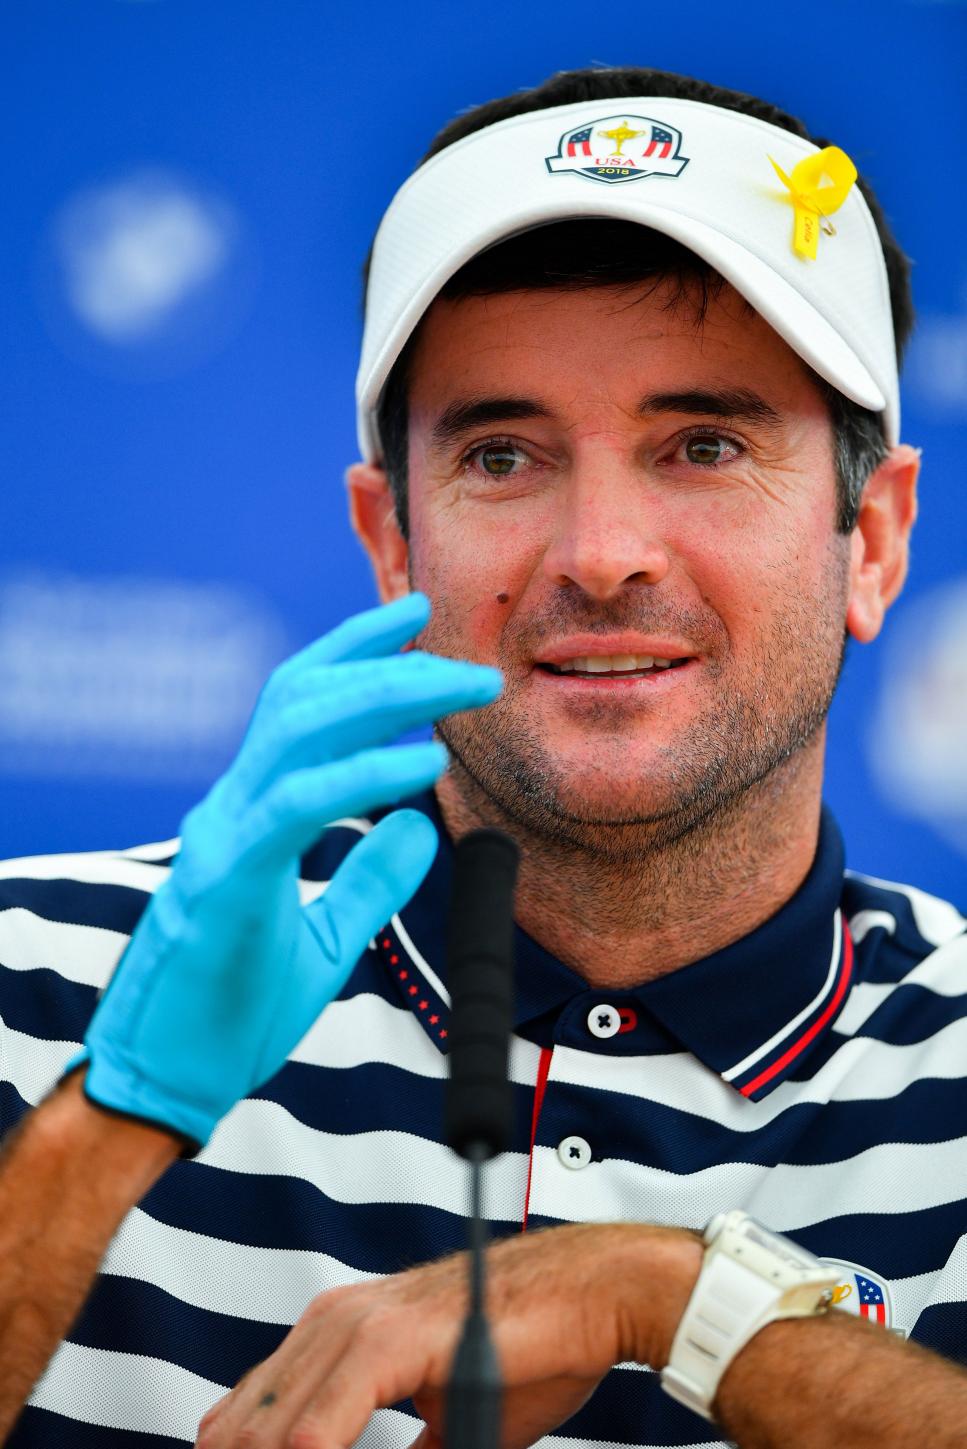 bubba-watson-ryder-cup-2018-glove-press-conference.jpg